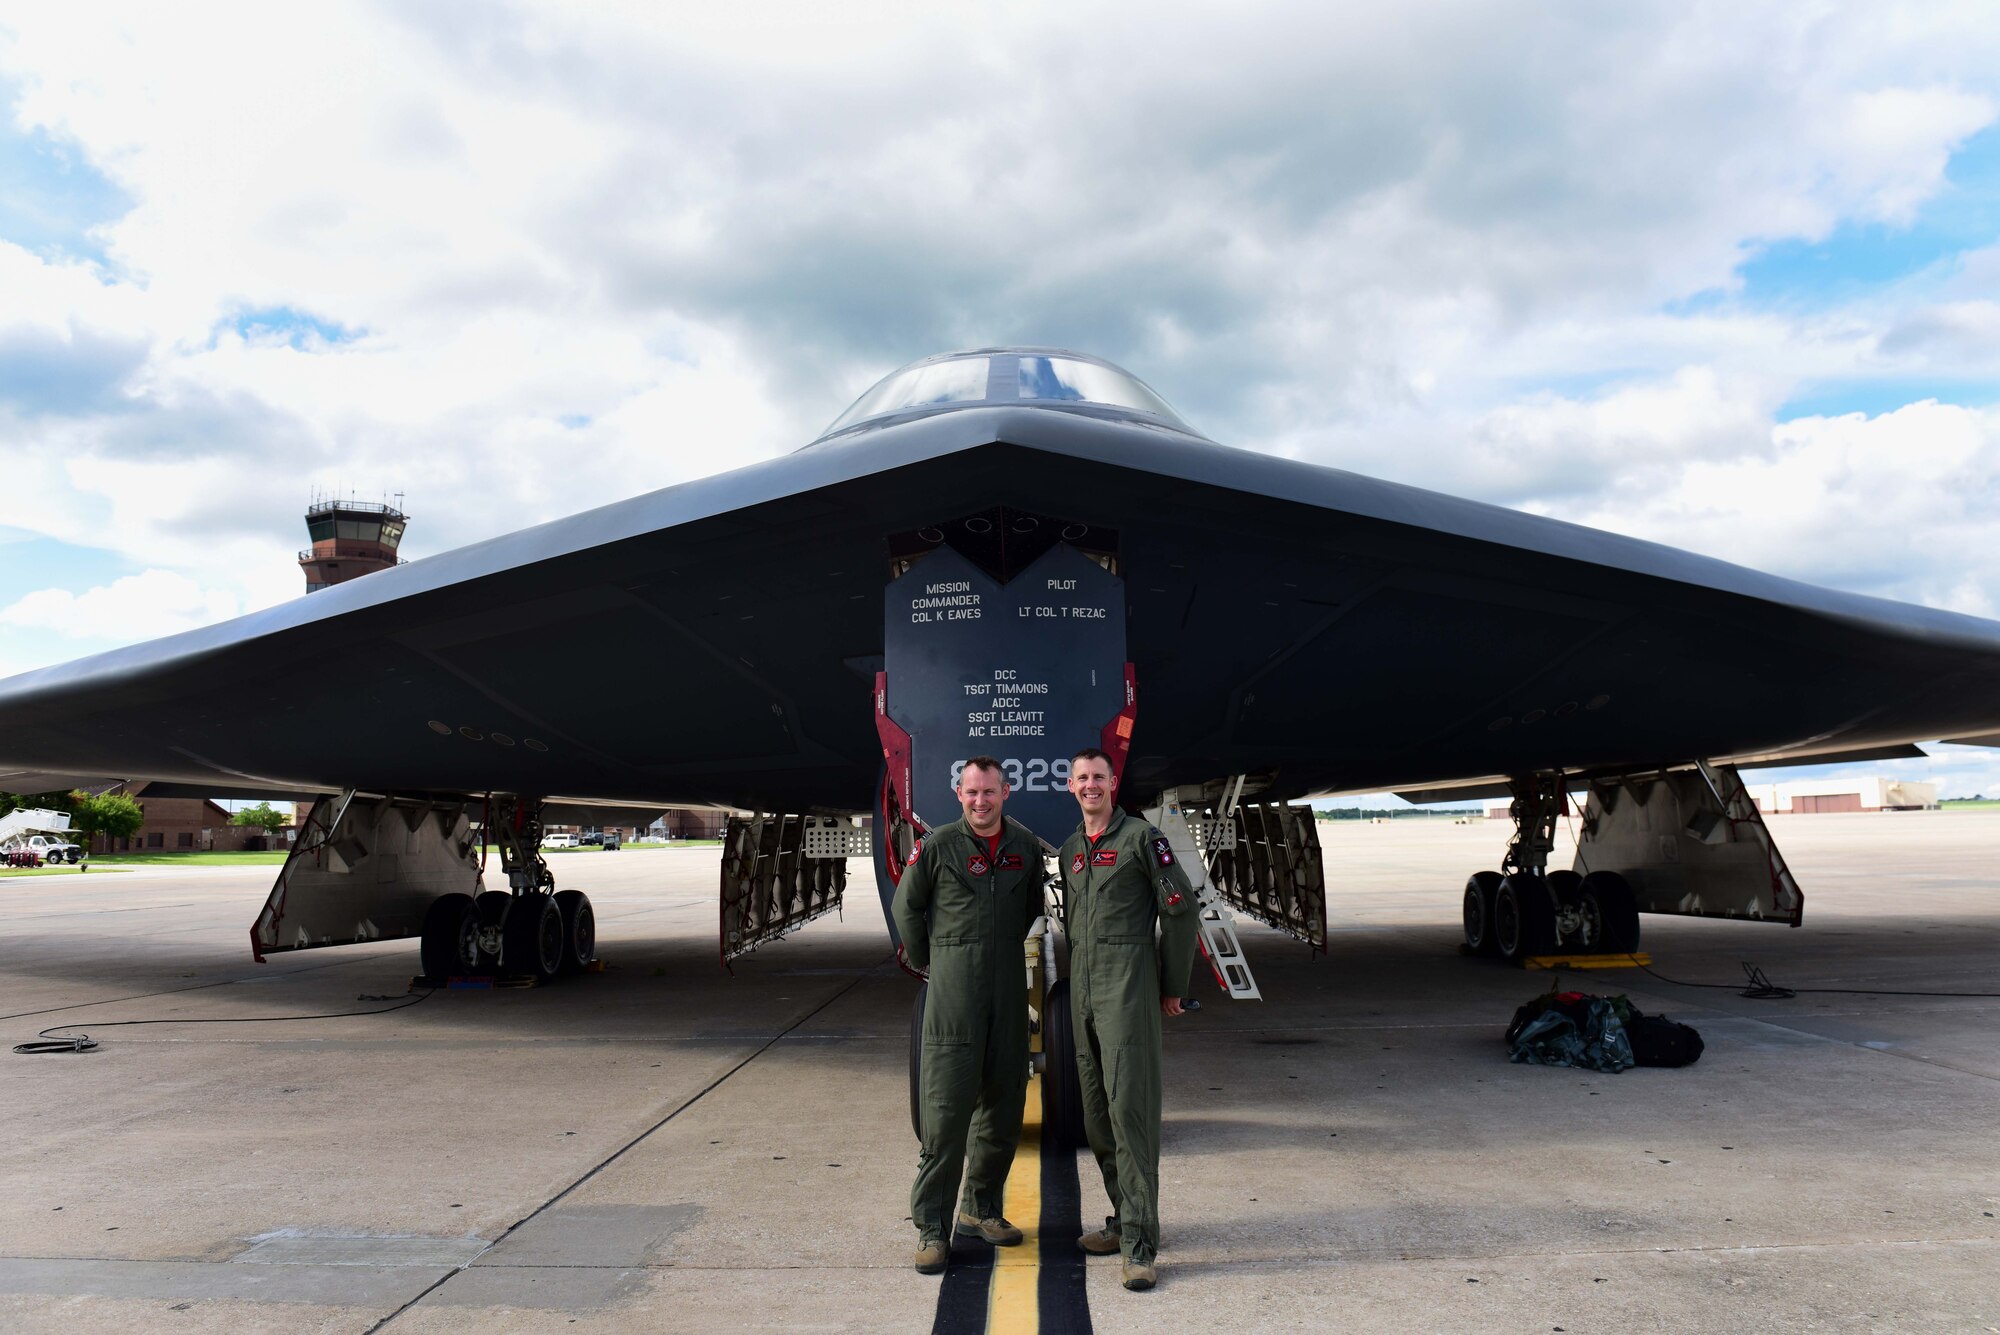 Royal Air Force (RAF) Squadron Leader Wesley Pead, a 13th Bomb Squadron assistant director of operations, left, flew his last B-2 Spirit flight with U.S. Air Force Capt. Dustin Duke, a 13th Bomb Squadron flight commander, at Whiteman Air Force Base, Mo., May 20, 2017. Pead was the fifth foreign exchange officer to take part in the Exchange Officer Program between the U.S. Air Force and the RAF.